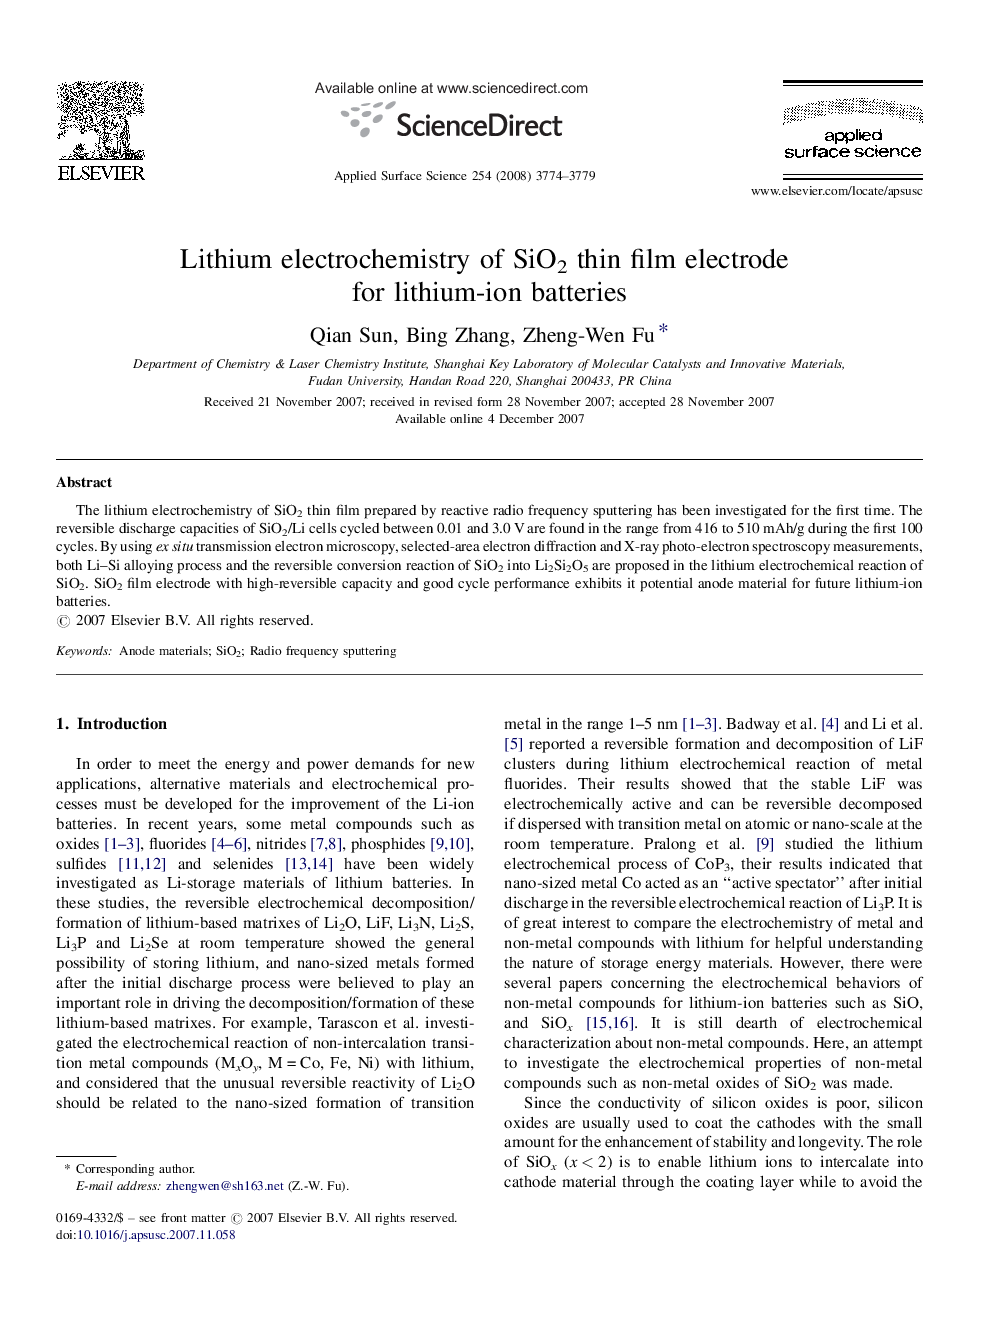 Lithium electrochemistry of SiO2 thin film electrode for lithium-ion batteries